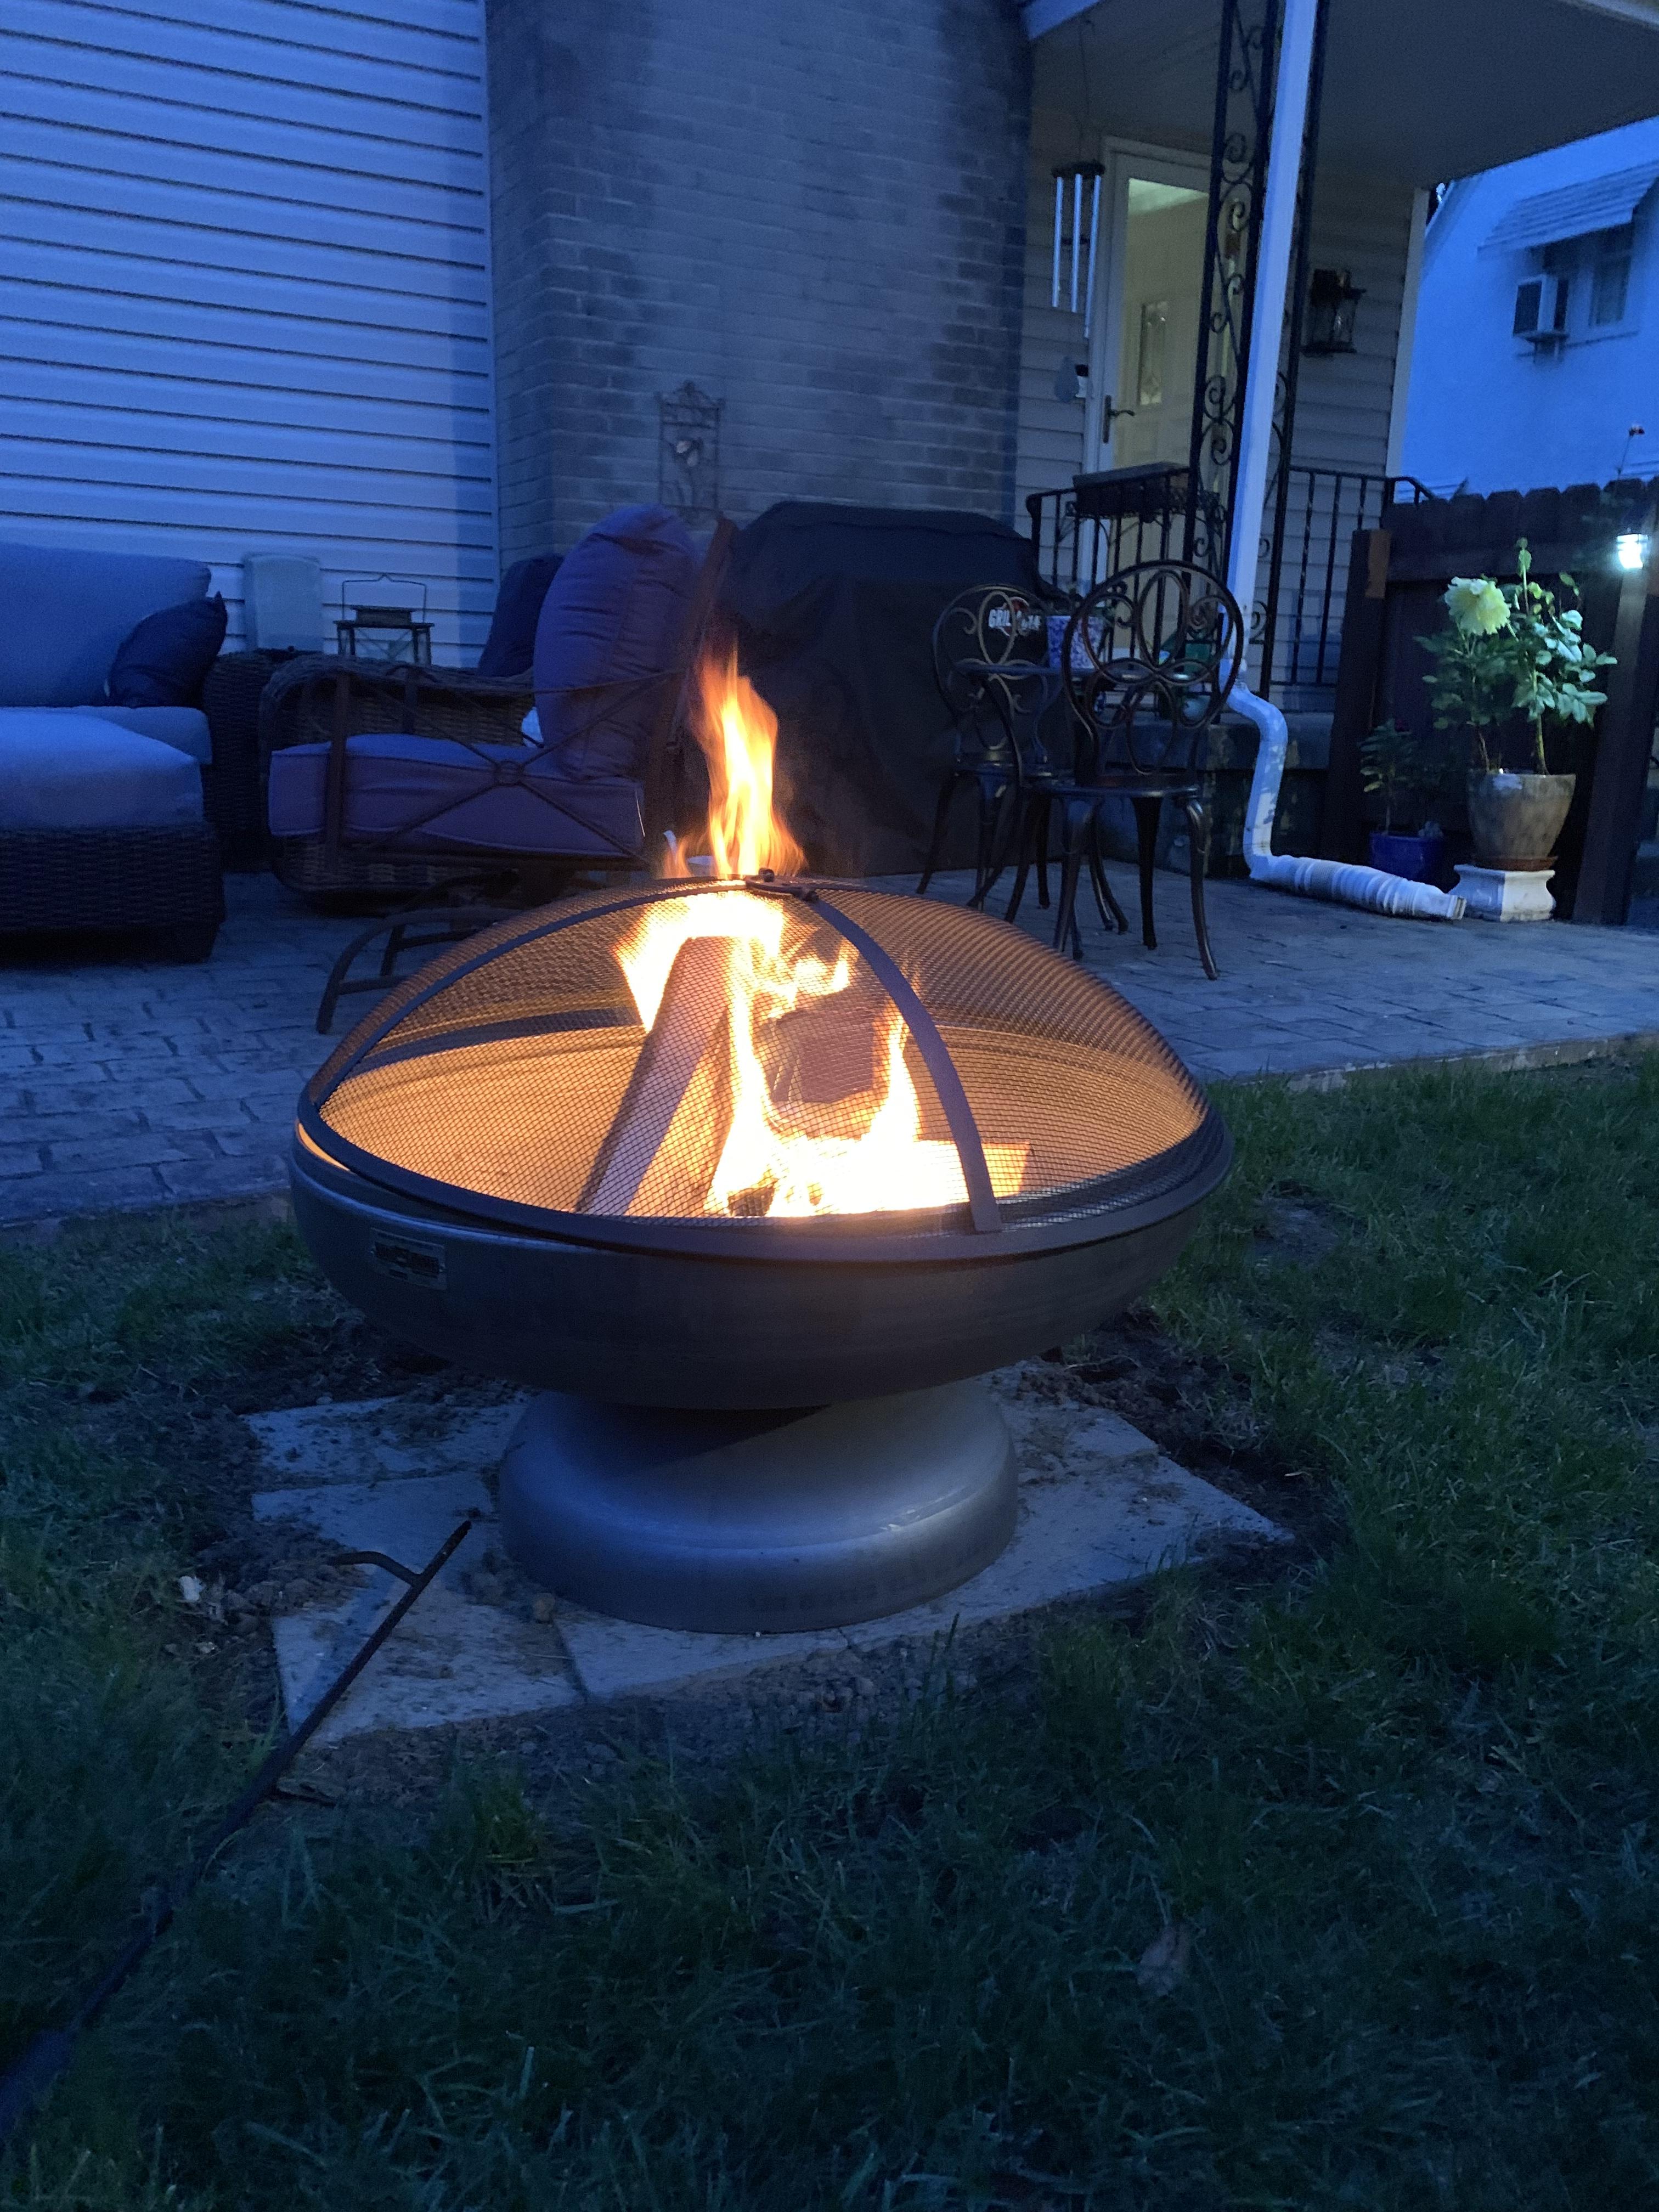 Patriot Fire Pit Made In Usa Ohio Flame, Ohio Flame Fire Pit